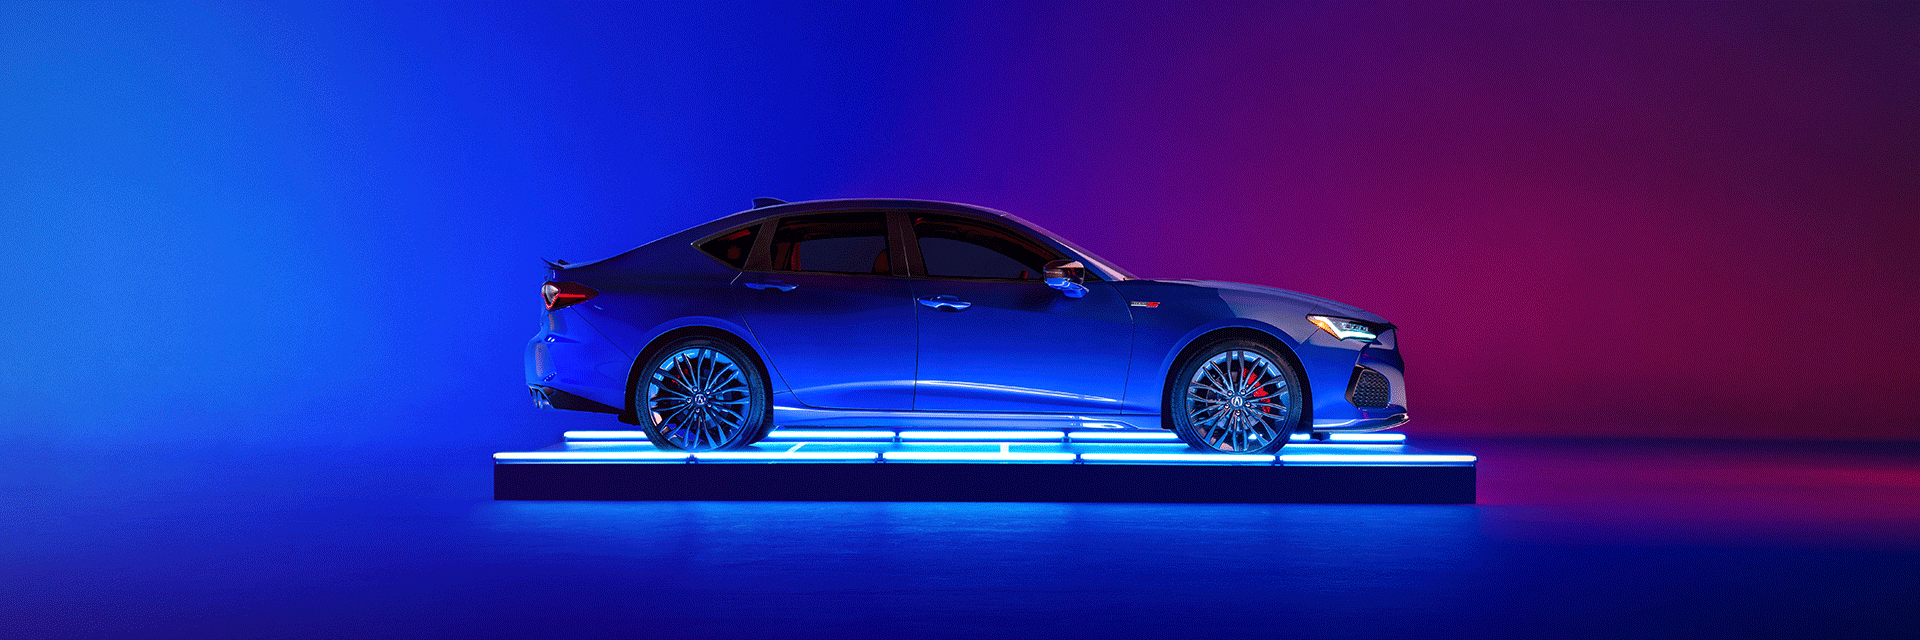 All-New 2022 Acura TLX at Bobby Rahal Acura | Profile View of Apex Blue Pearl 2022 Acura TLX on Platform with Neon Blue Lights on Left and Neon Red Lights on Right